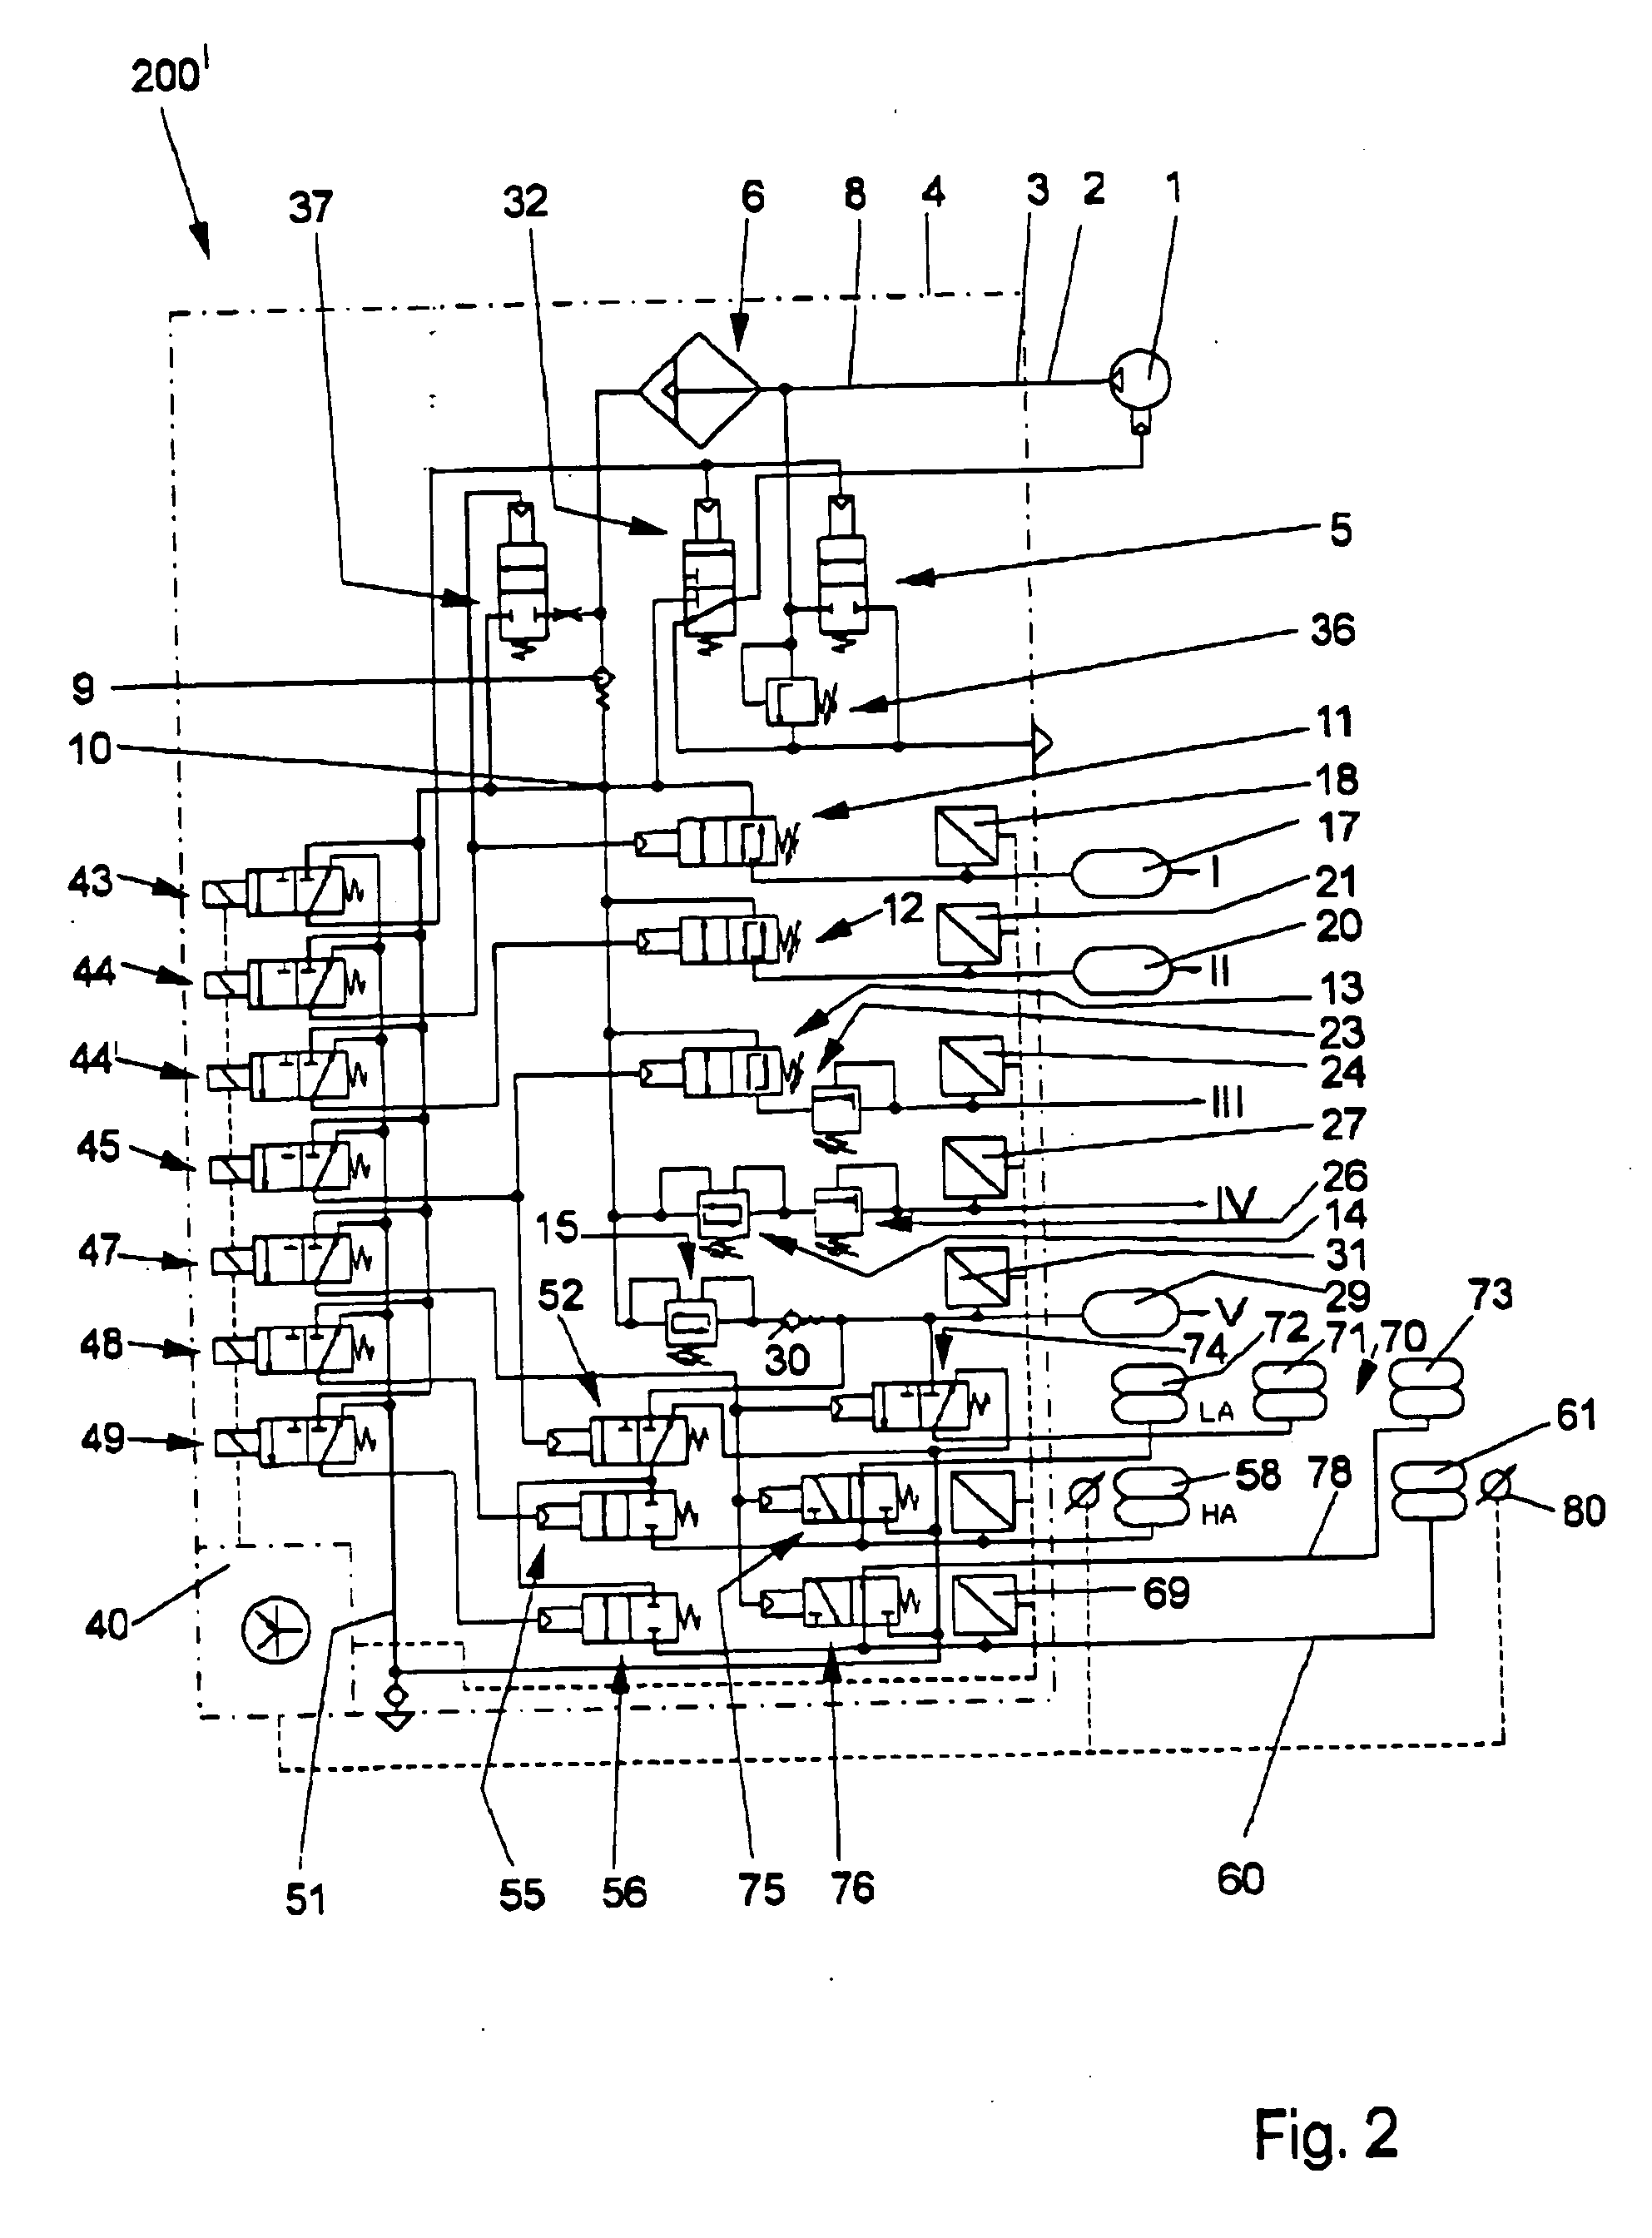 Compressed air processing apparatus for compressed air systems of motor vehicles